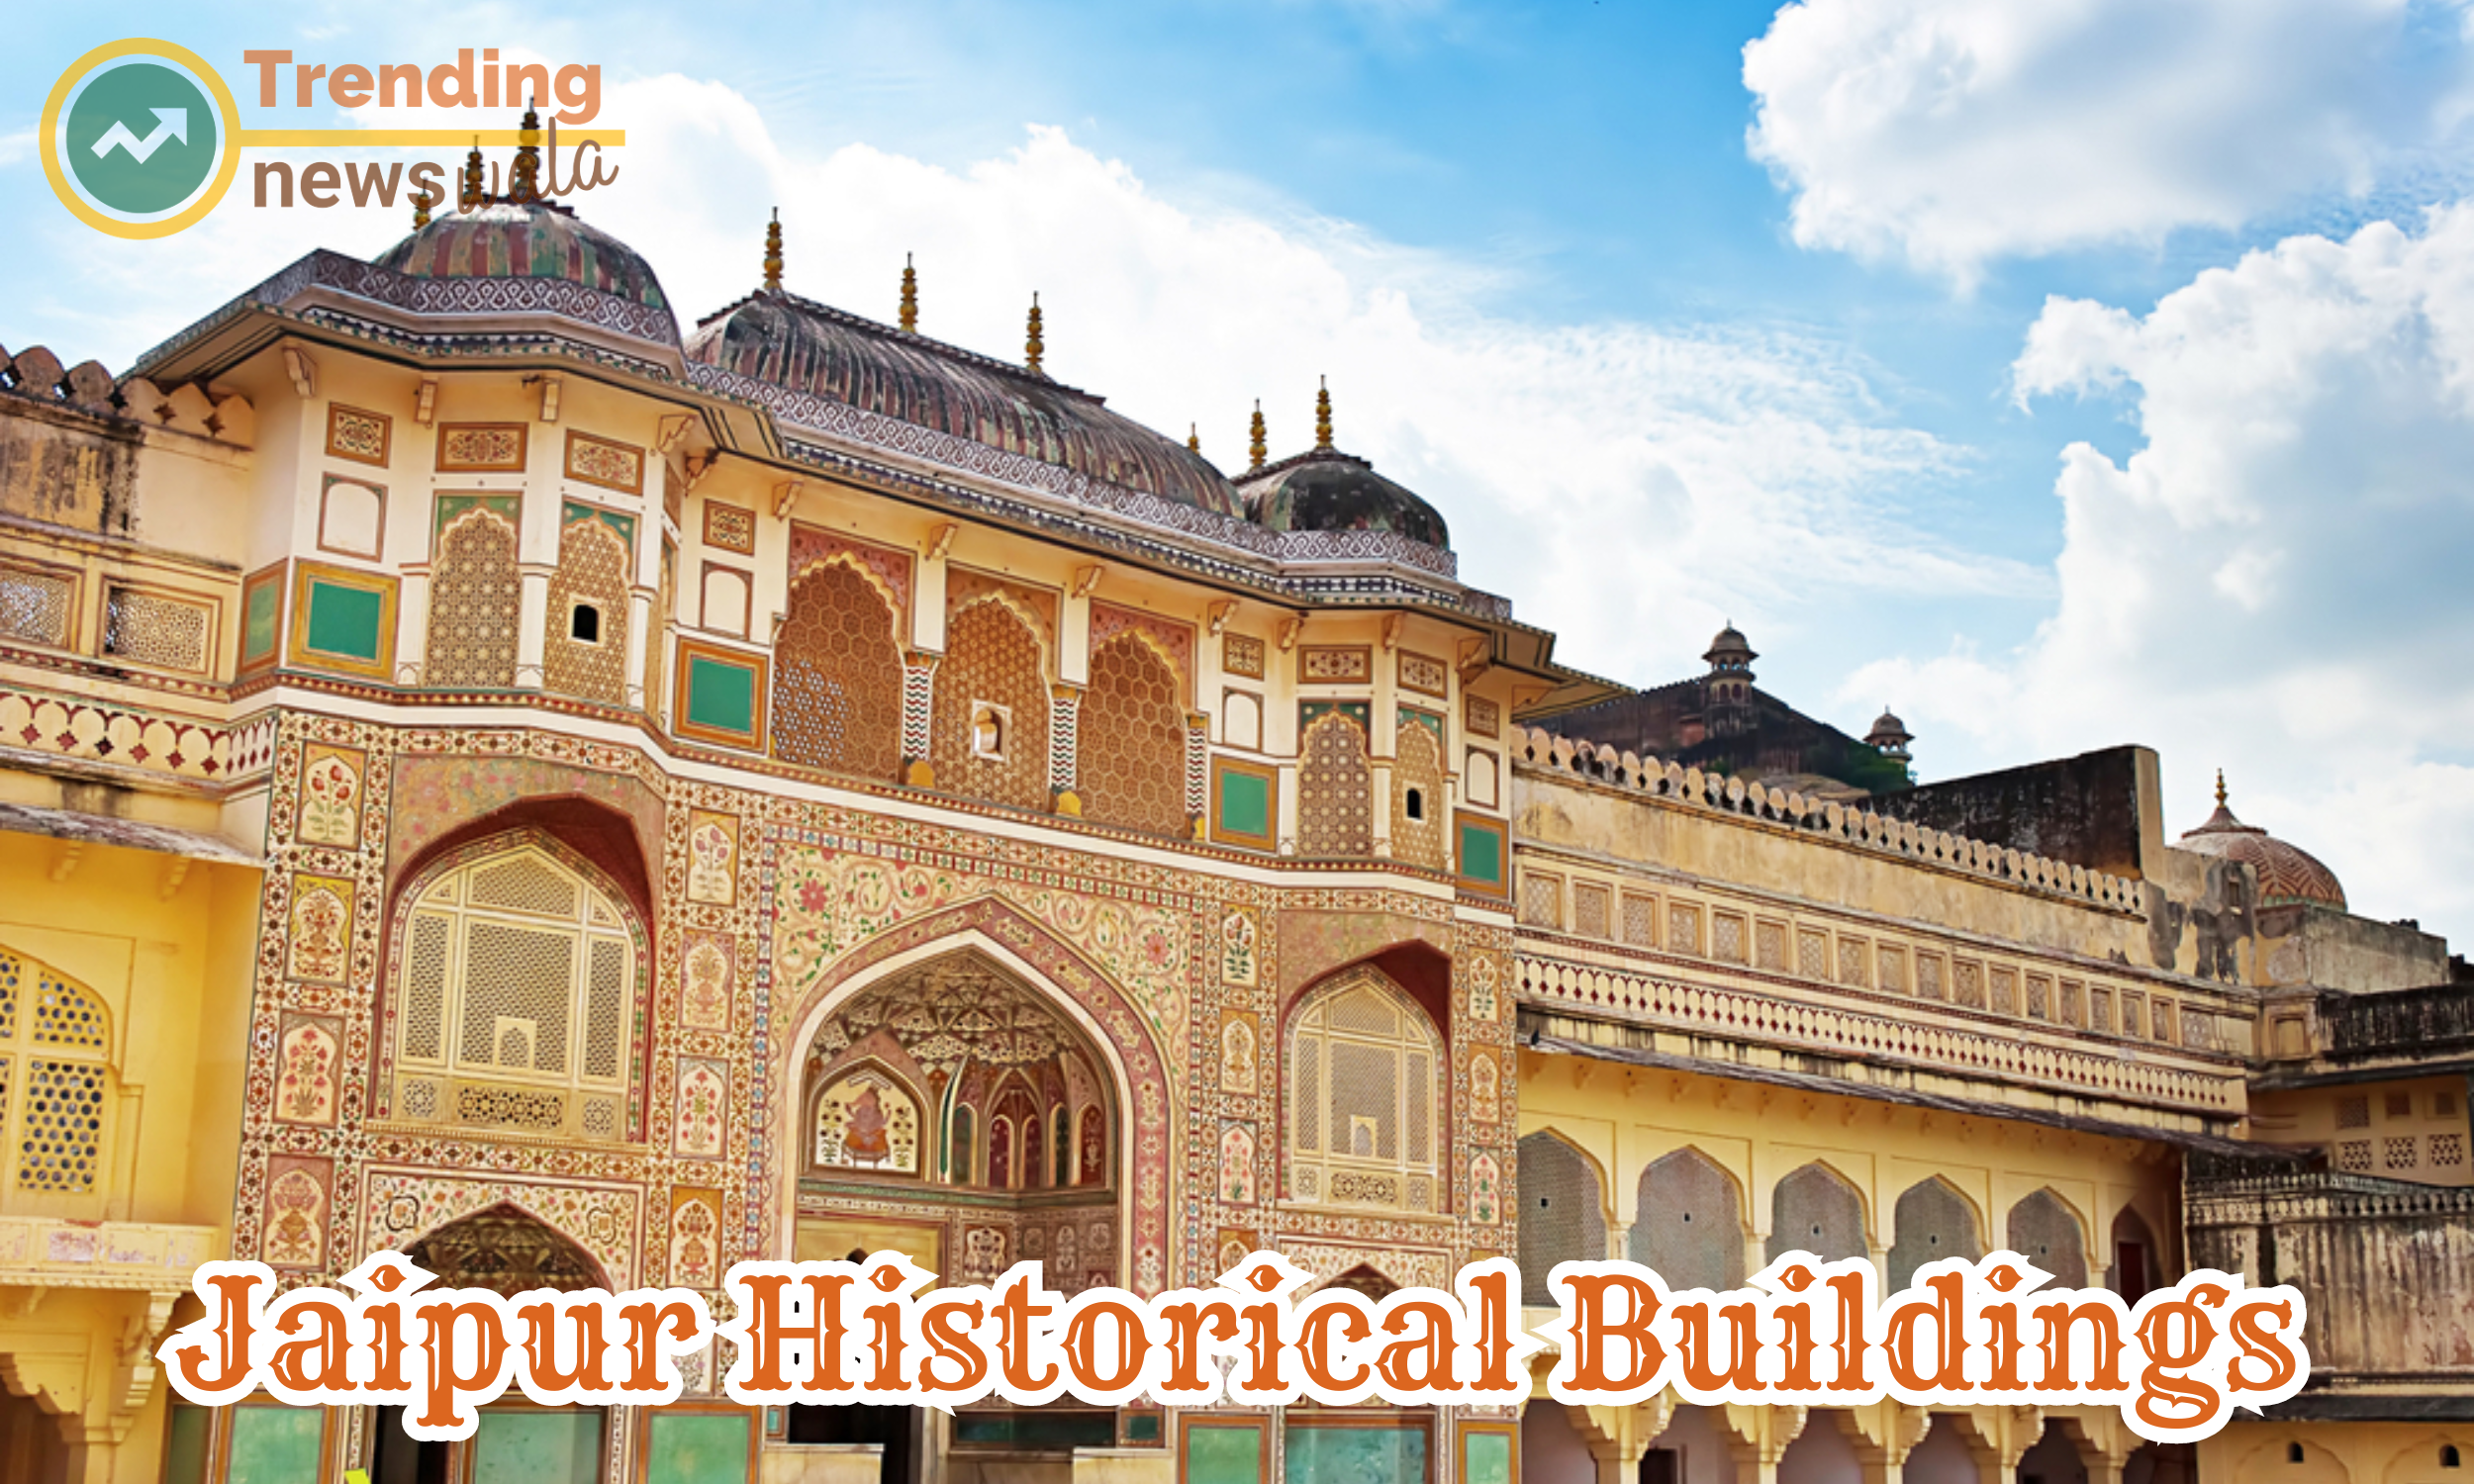  The prominent historical buildings in Jaipur